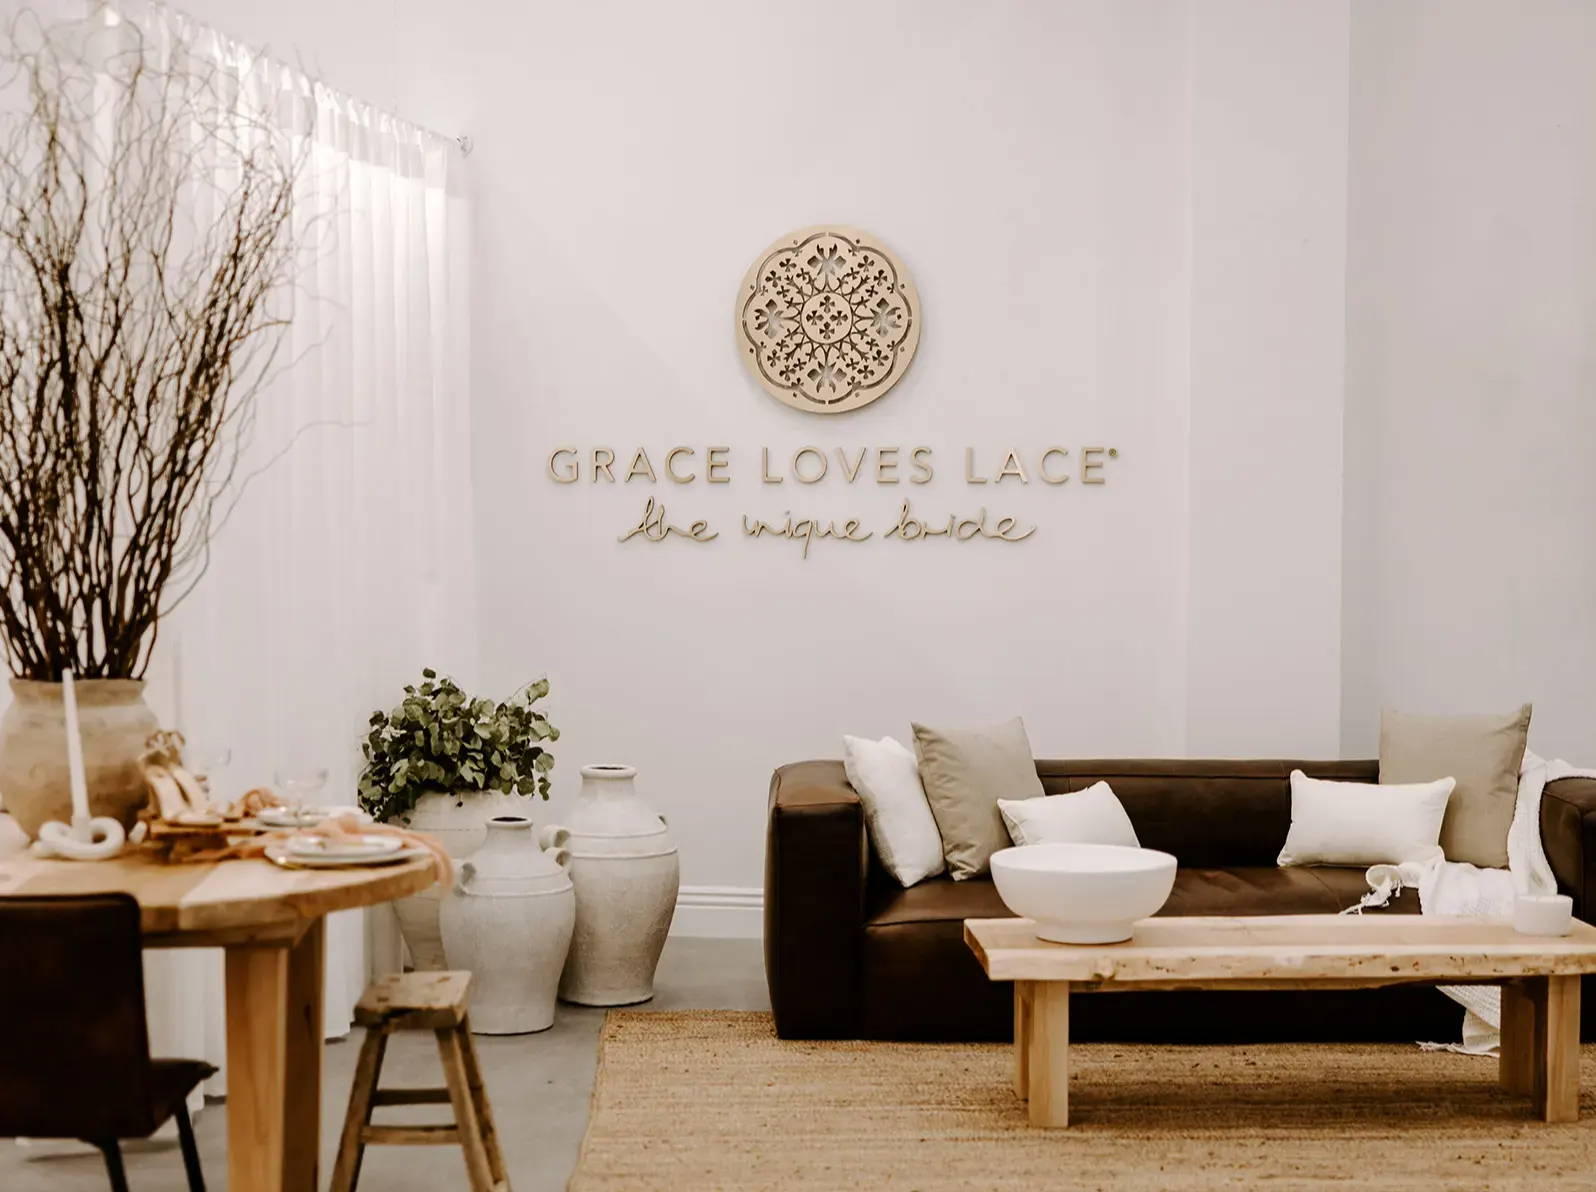 Grace Loves Lace Boutique with coffee table, lounge and large vases